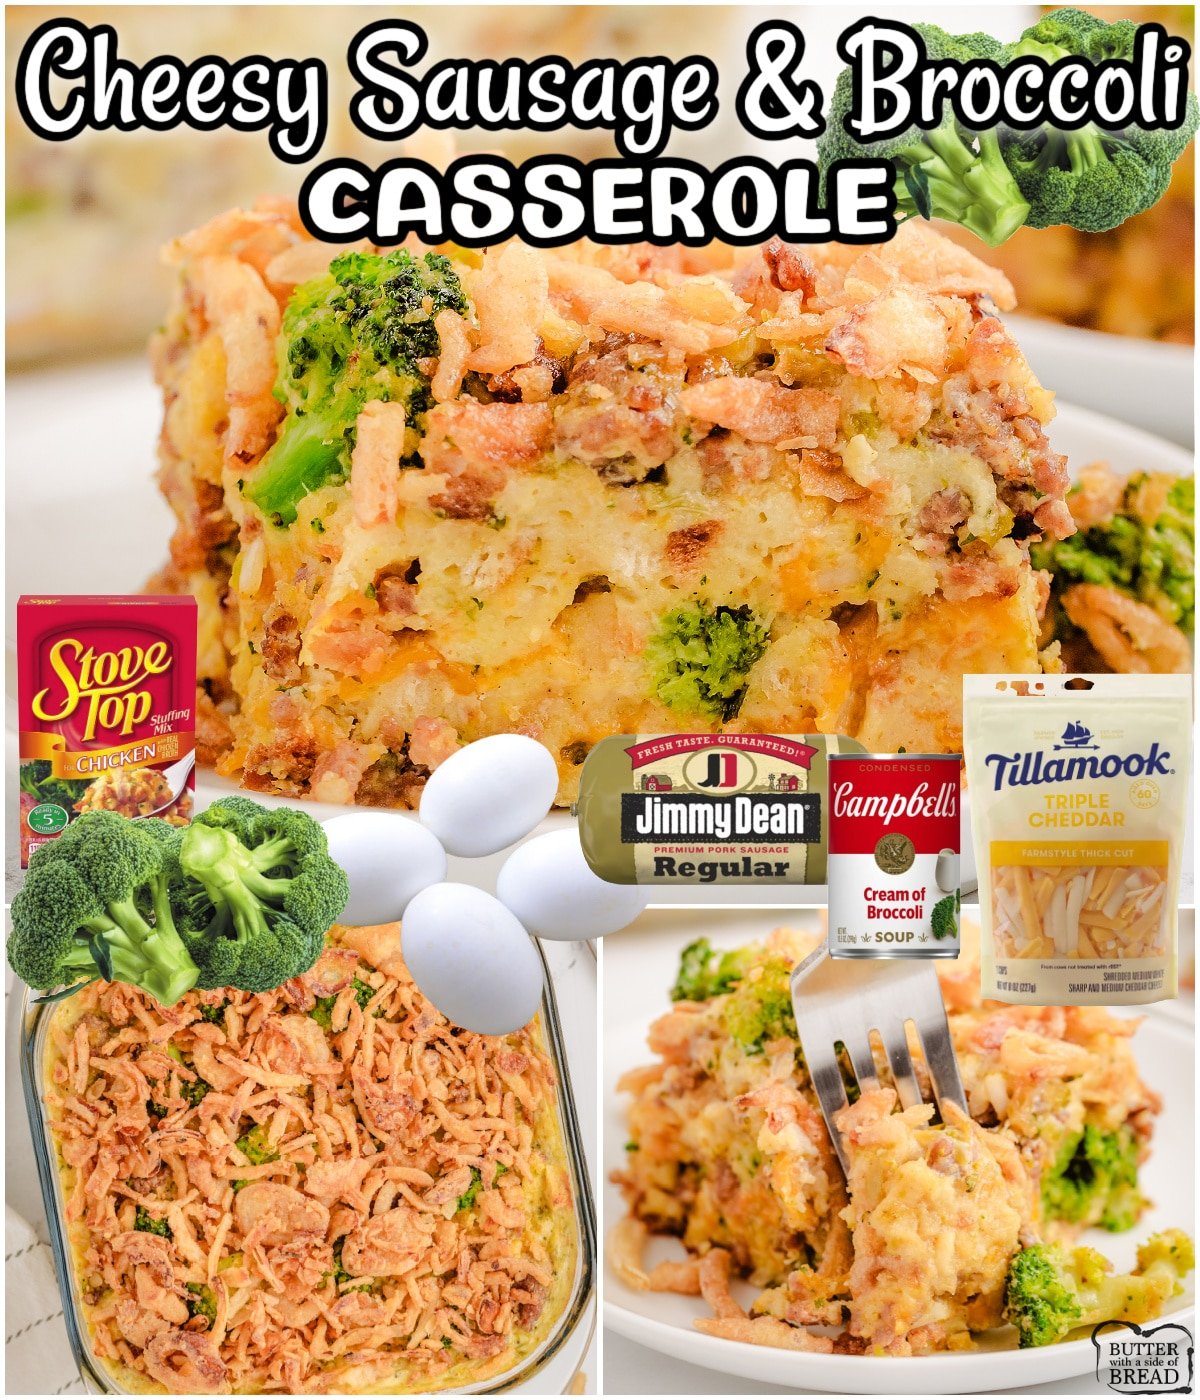 Sausage & Broccoli Casserole is a creamy, flavorful dinner made with stuffing mix, eggs, milk, and of course, sausage & broccoli. A fantastic protein-packed dinner that's ready in under an hour!